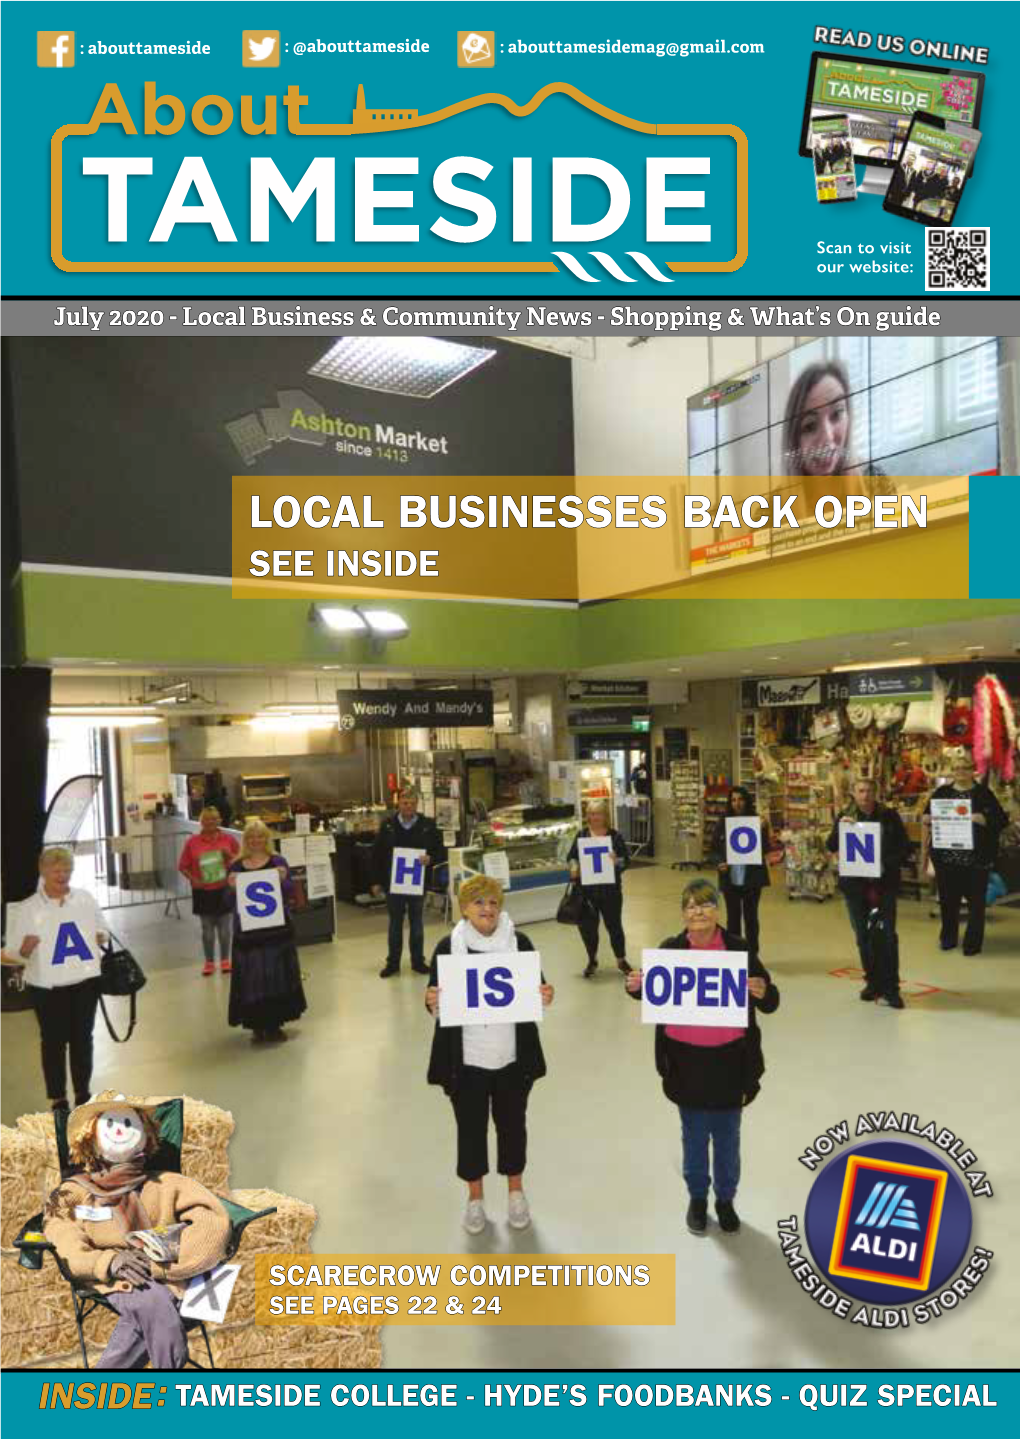 July 2020 - Local Business & Community News - Shopping & What’S on Guide